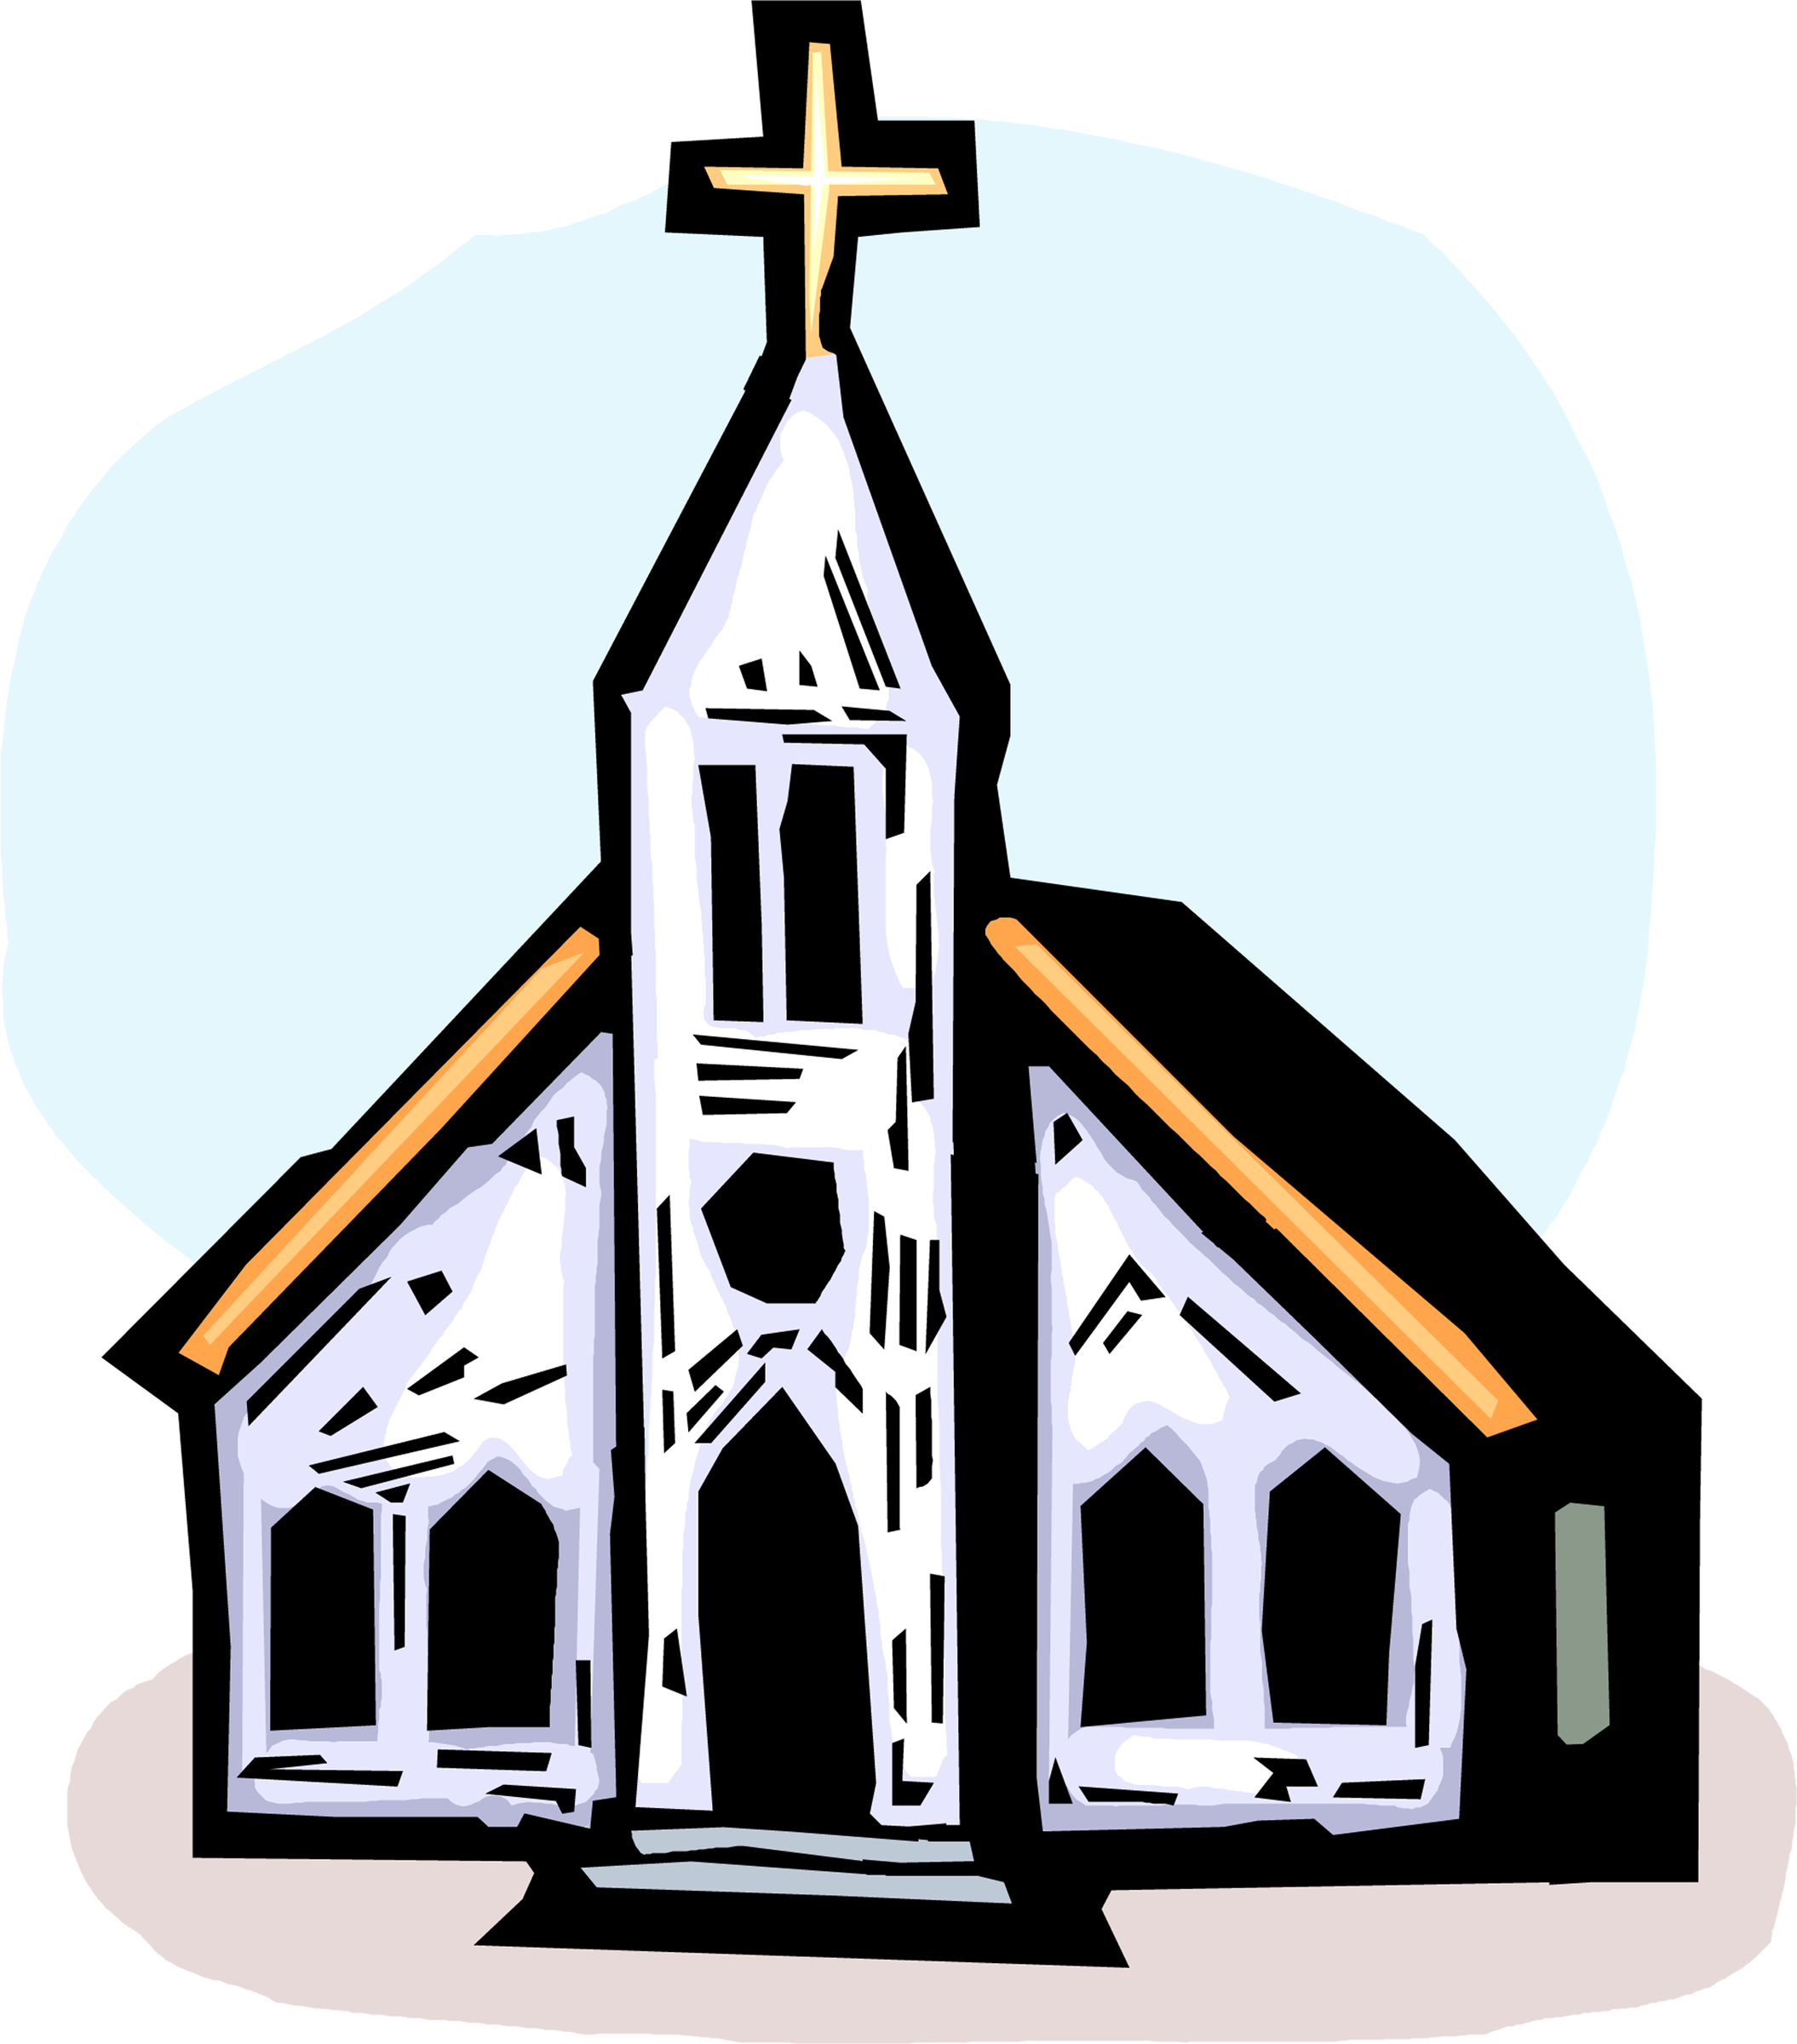 Construction project diary of. Fundraising clipart committee church